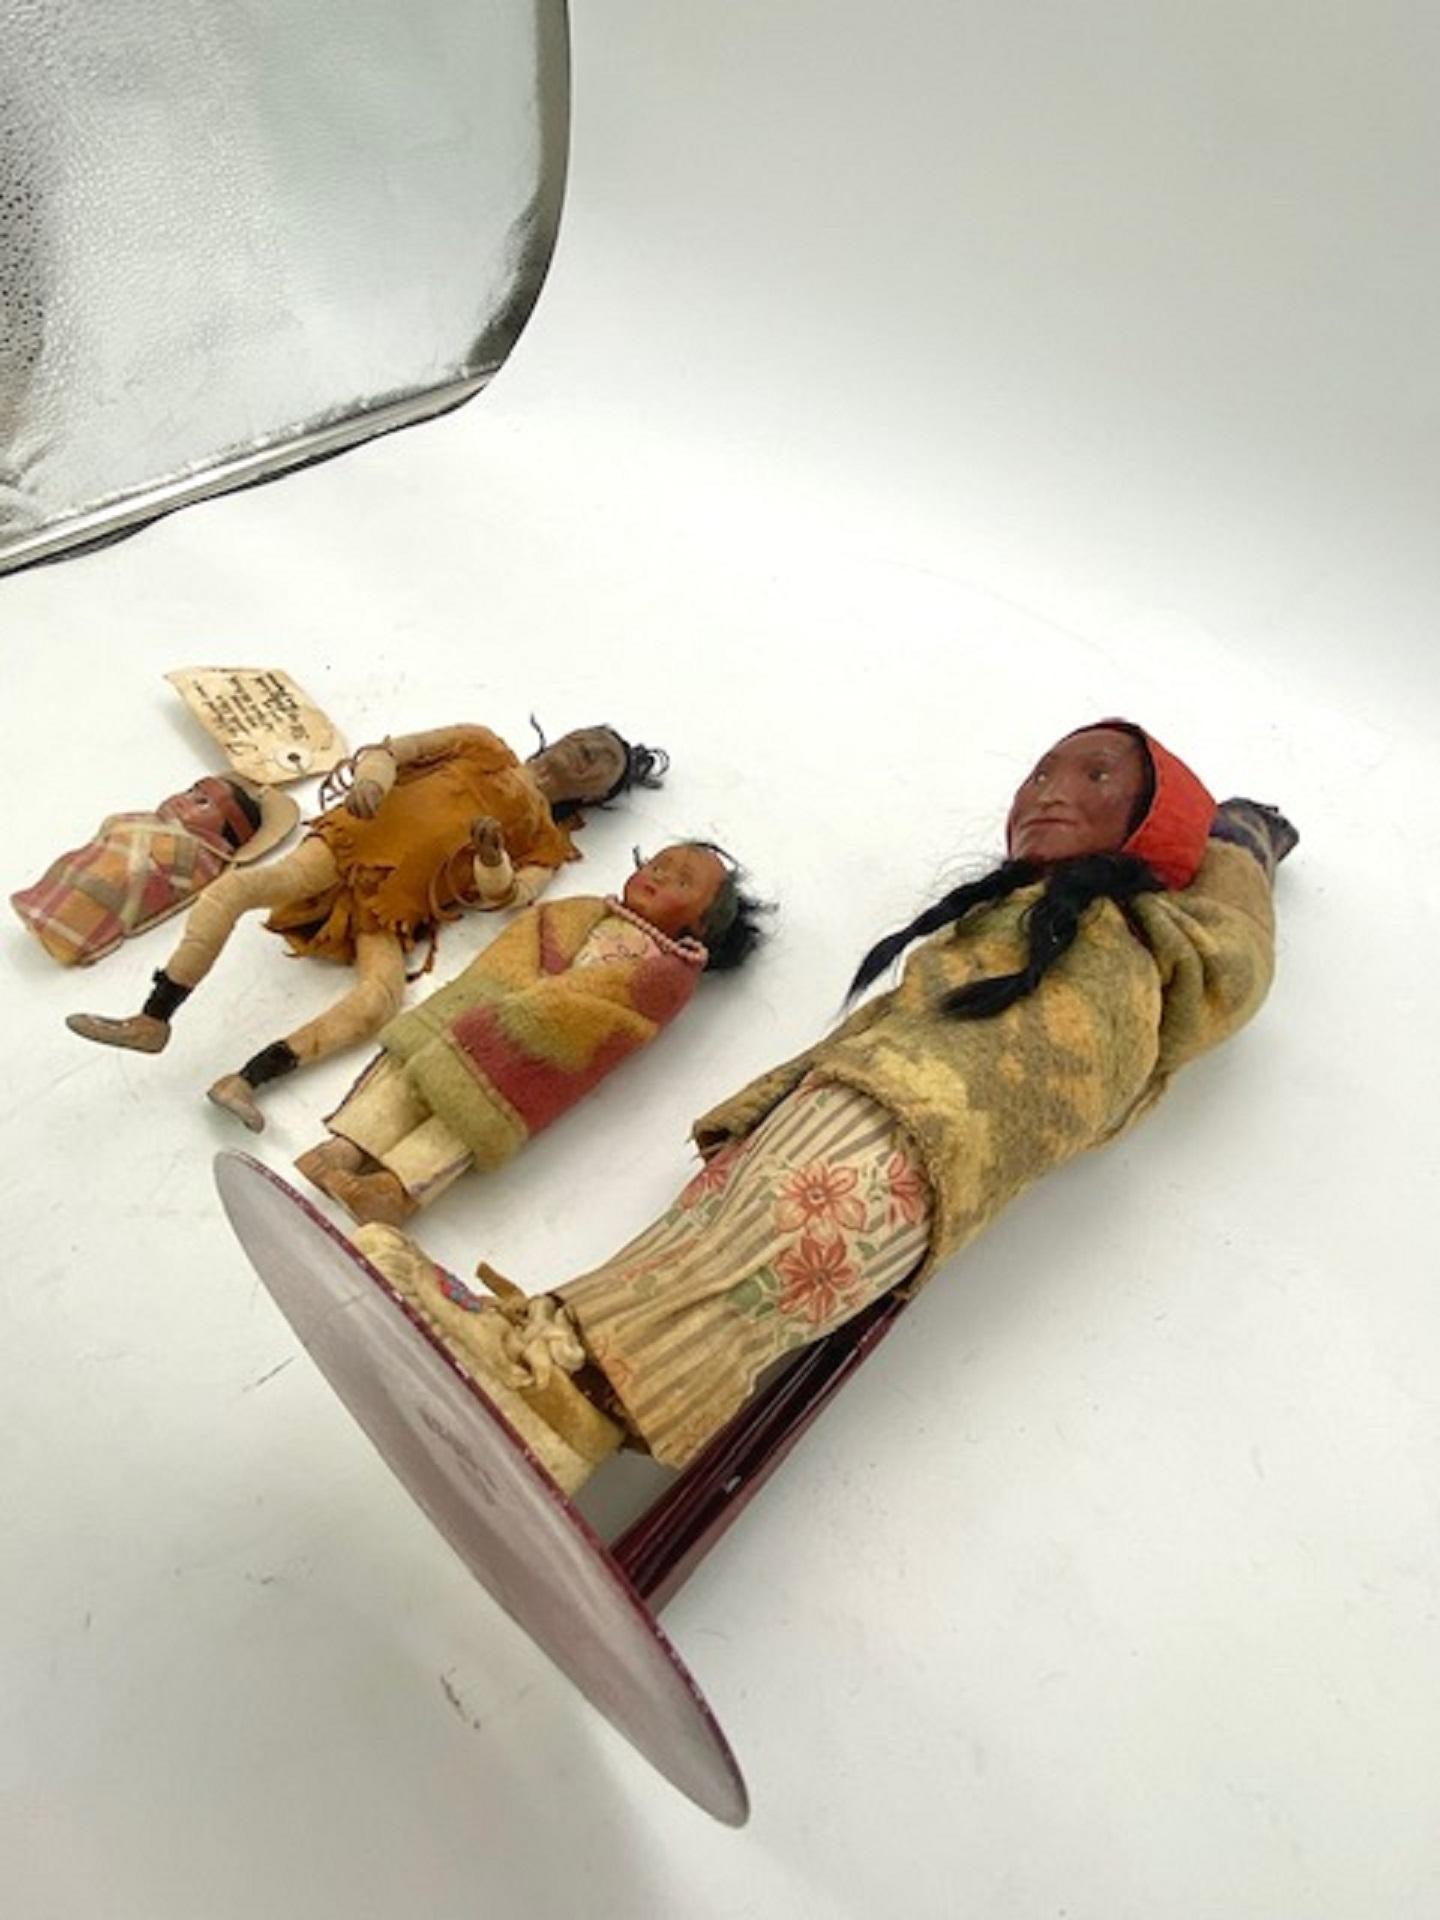 The history of Skookum dolls starts with Mary McAboy filing two applications for patents for a doll or toy figure on November 29, 1913. After the popularity rose in 1920, They were factory-made dolls from the 1920s-1960s that resembled Native